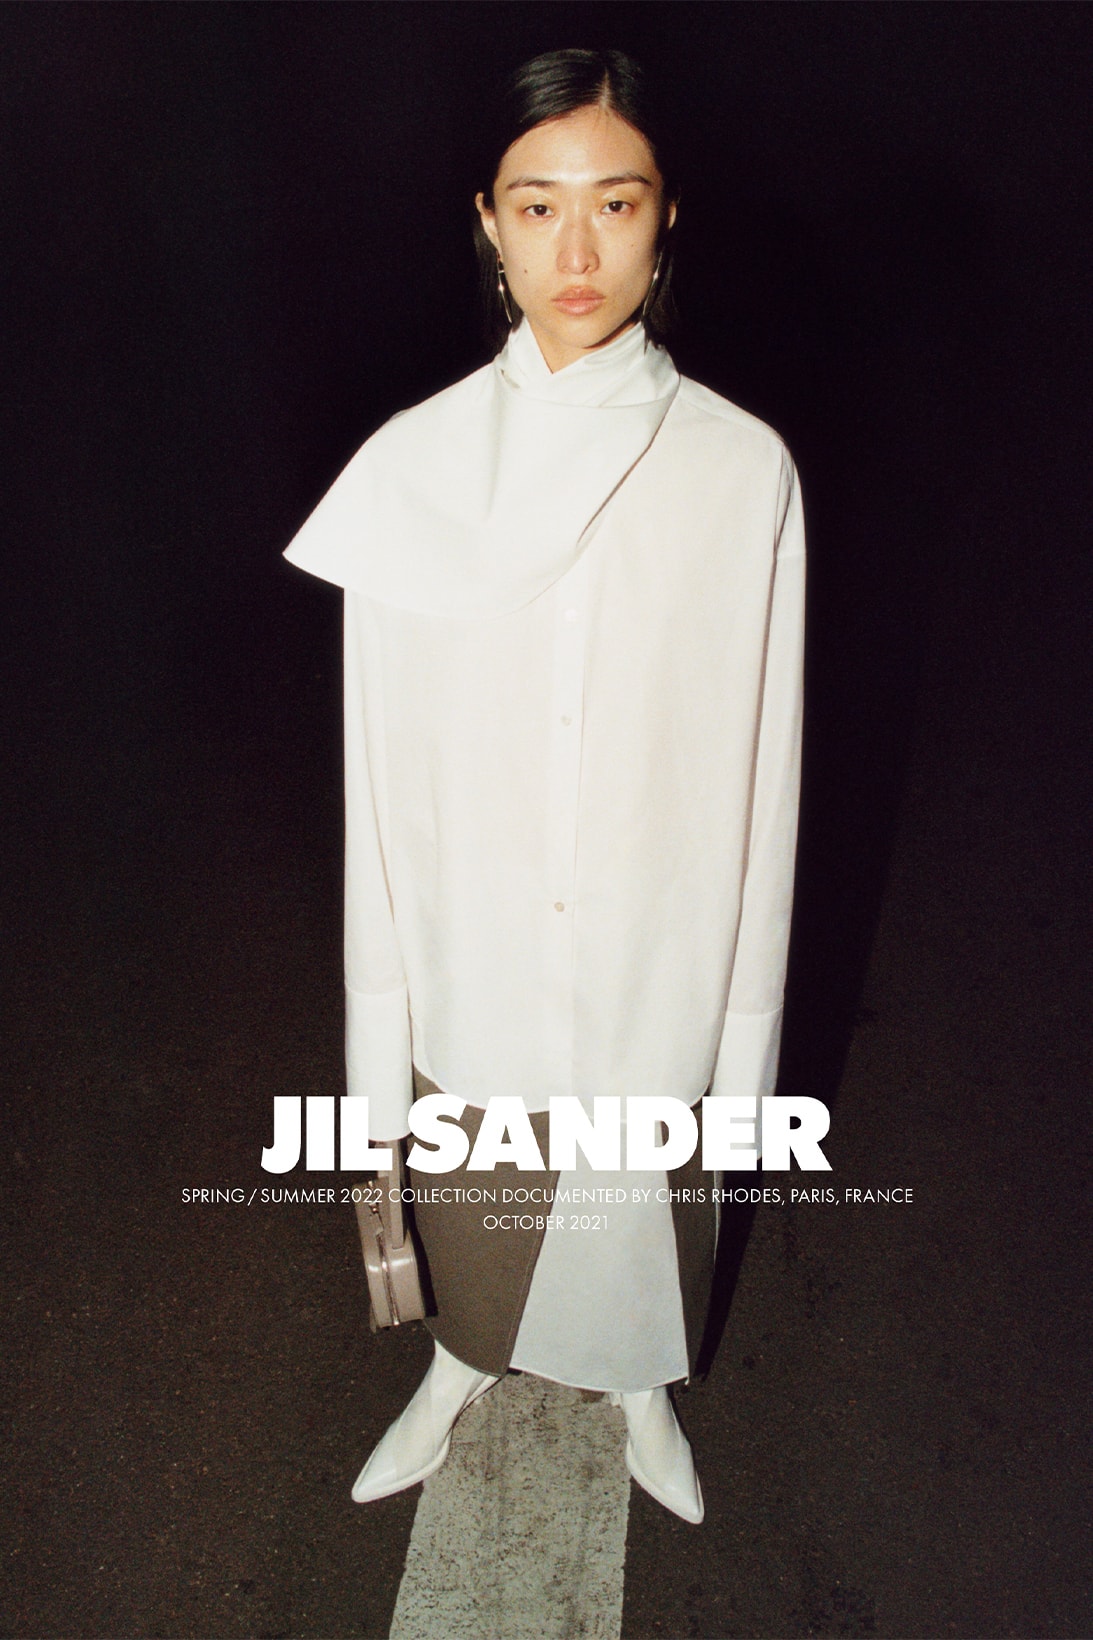 Jil Sander SS22 Collection Advertising Campaign